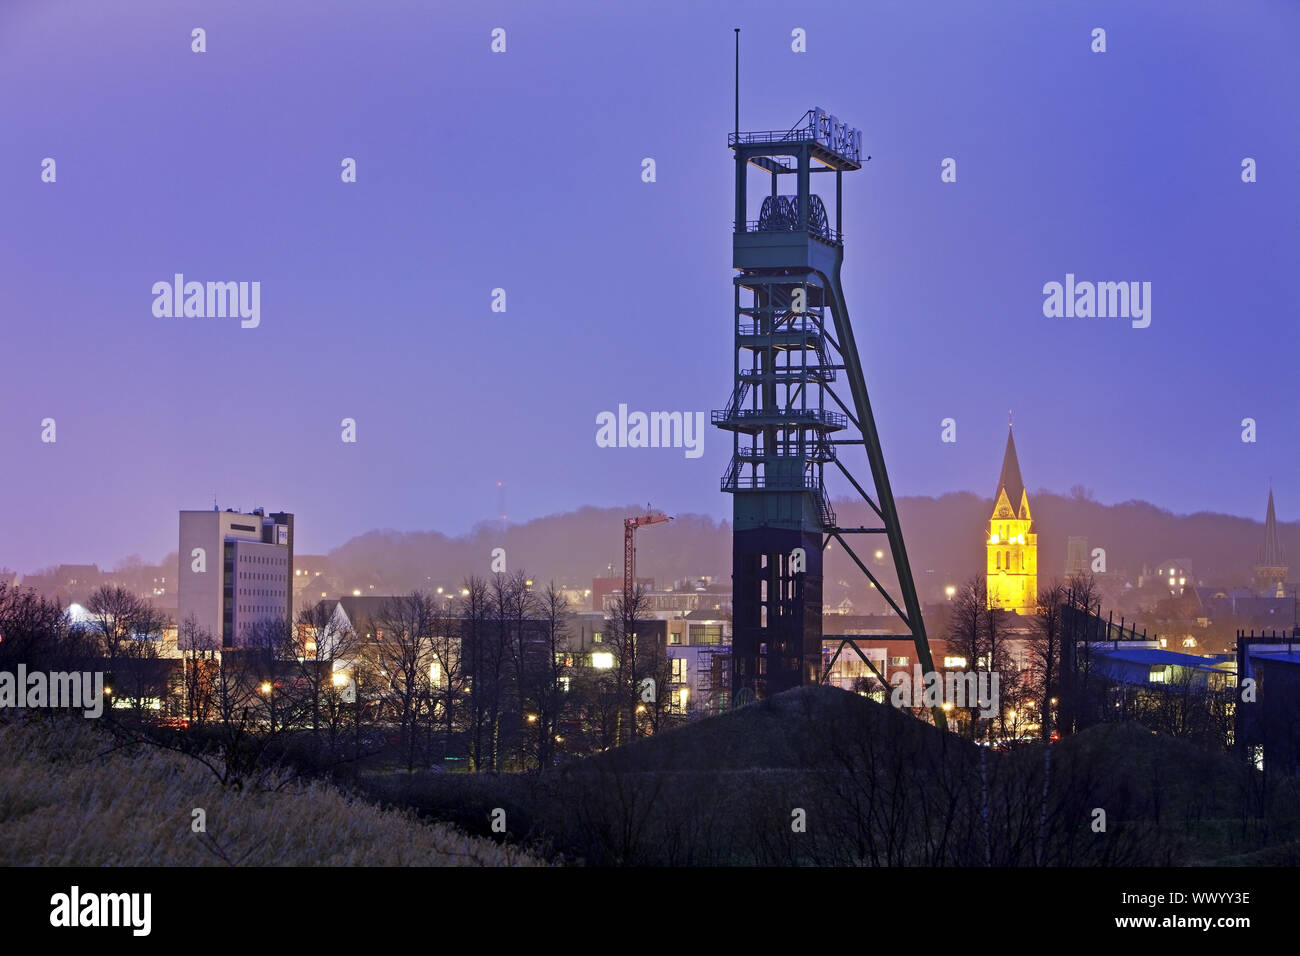 The conveyor tower of the Erin colliery at night in Castrop-Rauxel, Ruhr Area, Germany, Europe Stock Photo